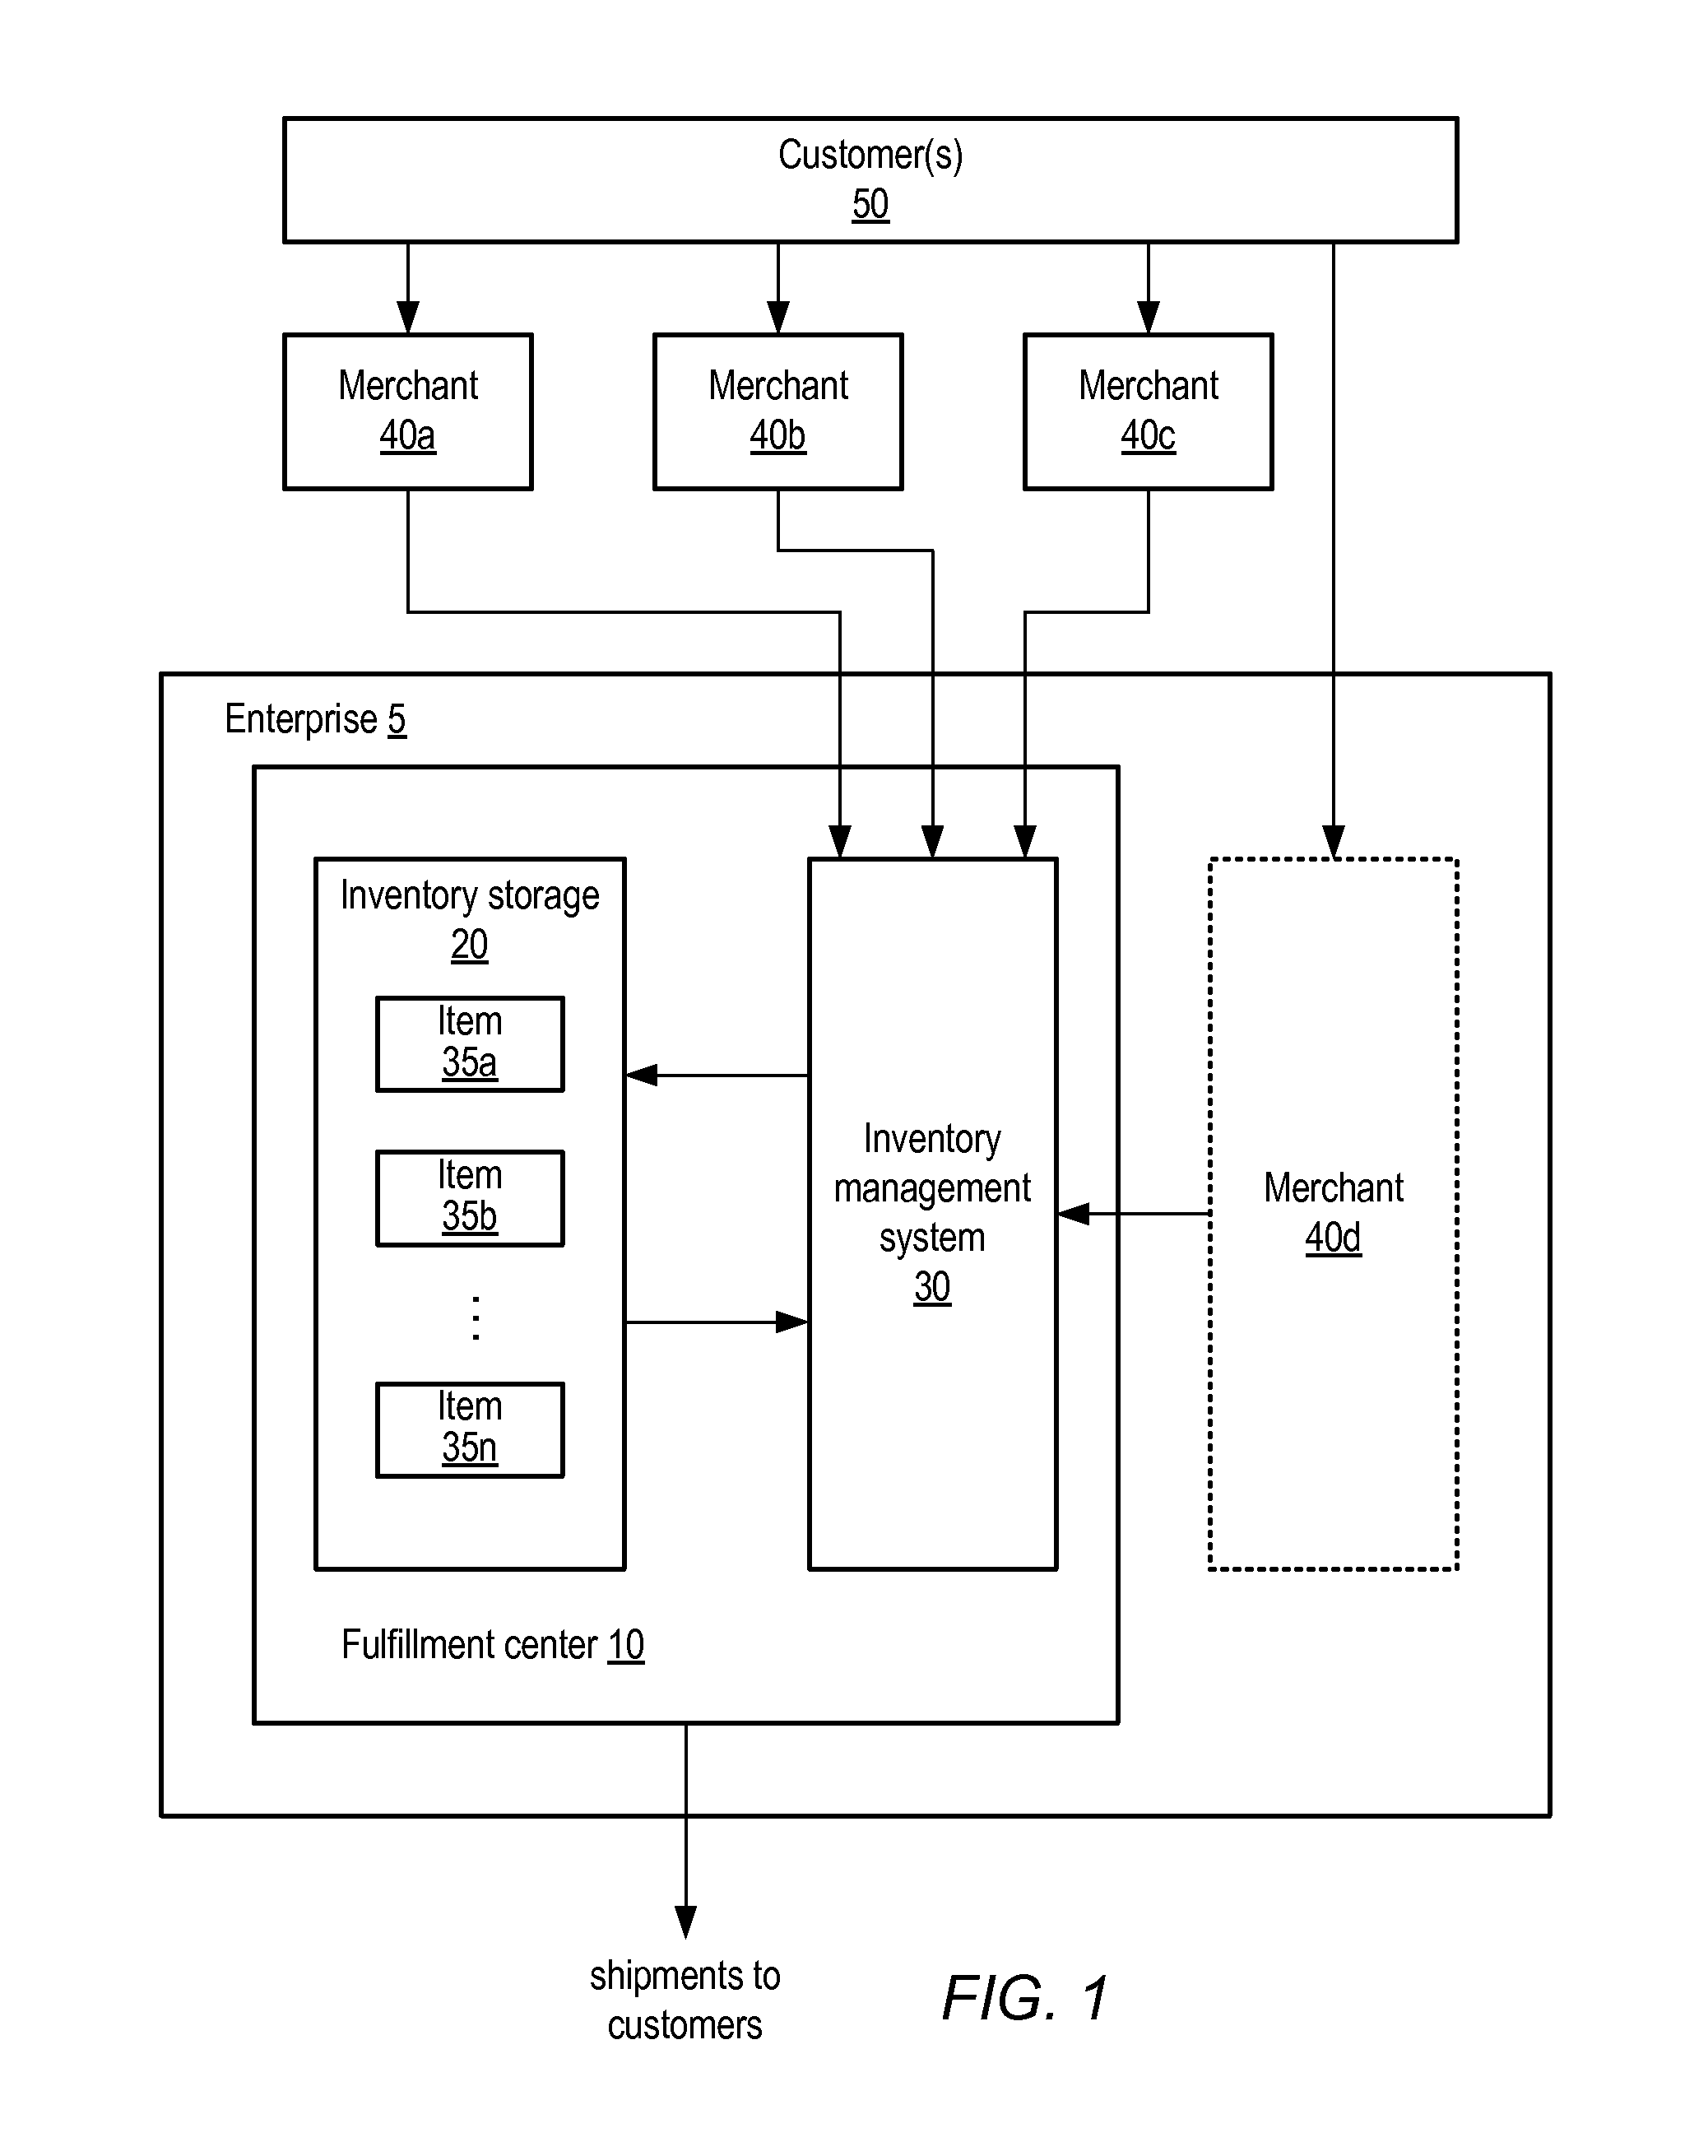 Method and apparatus for registration of fulfillment services